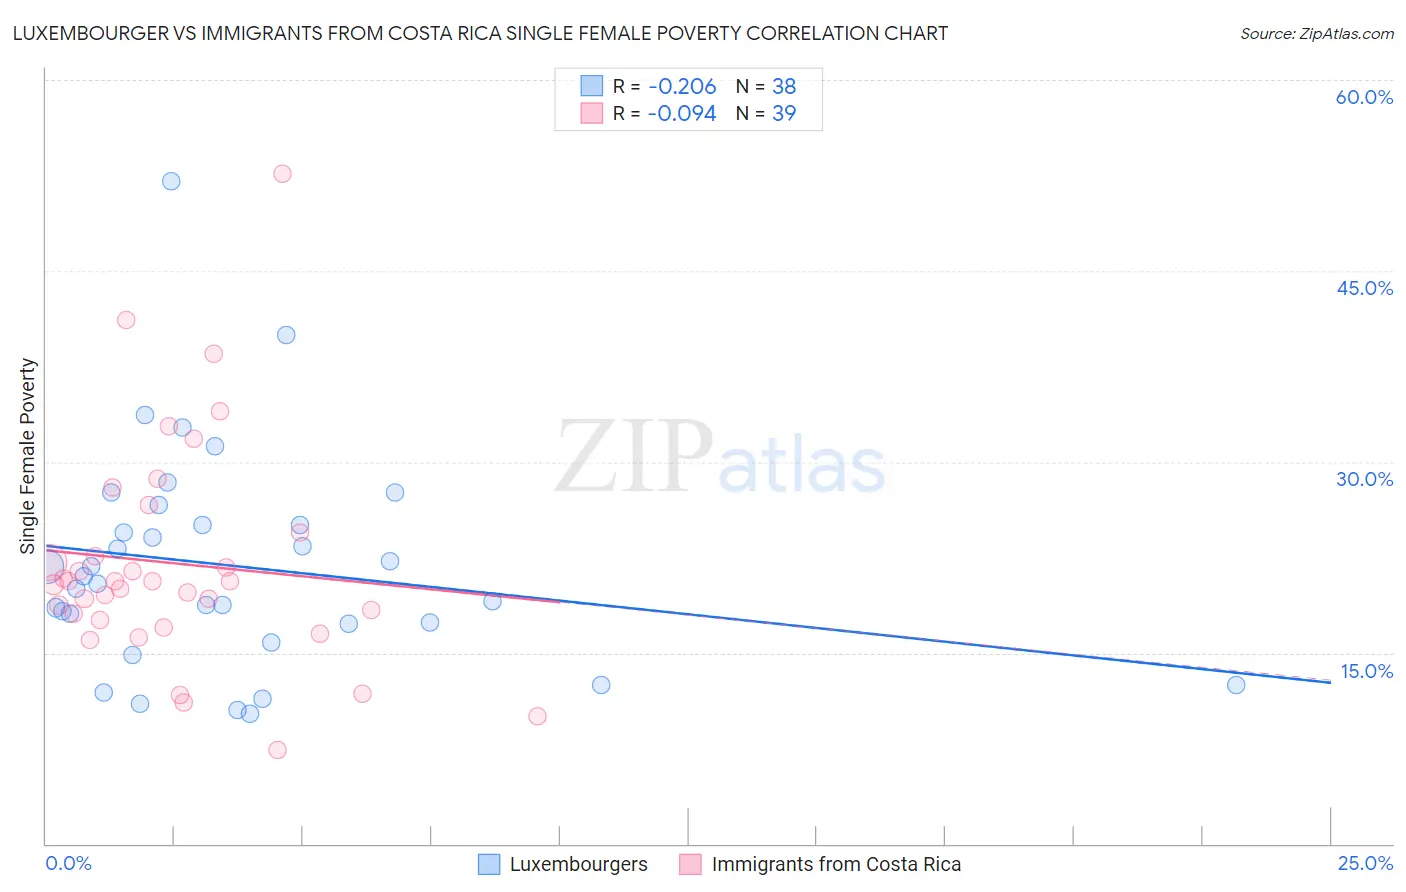 Luxembourger vs Immigrants from Costa Rica Single Female Poverty